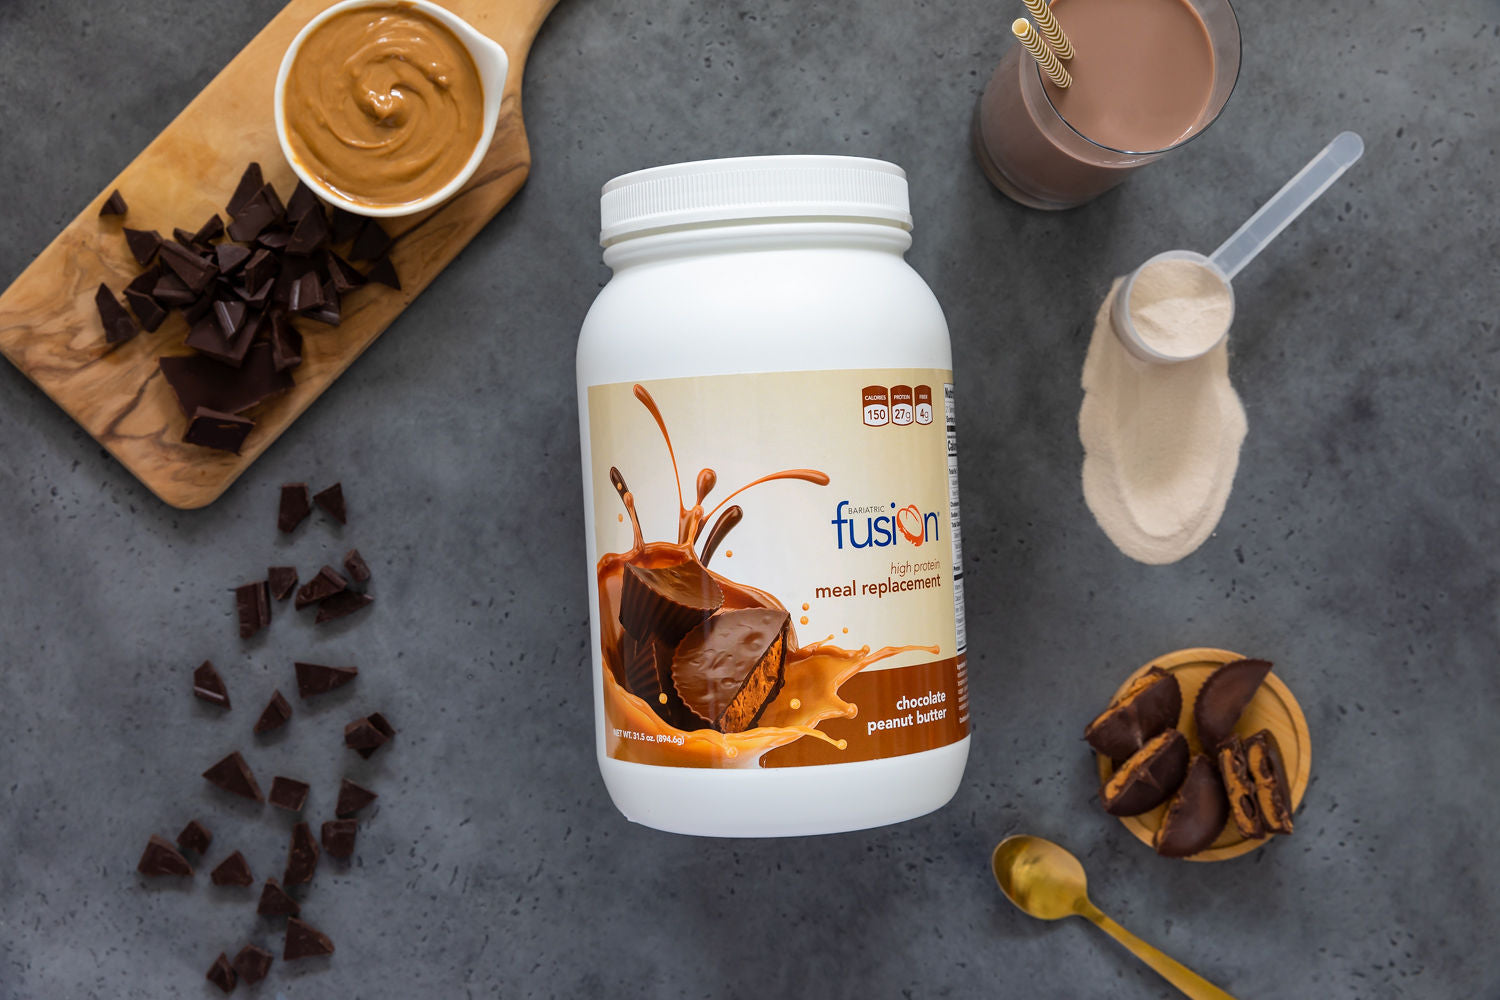 Bariatric Fusion Chocolate Peanut Butter Meal Replacement Protein Powder